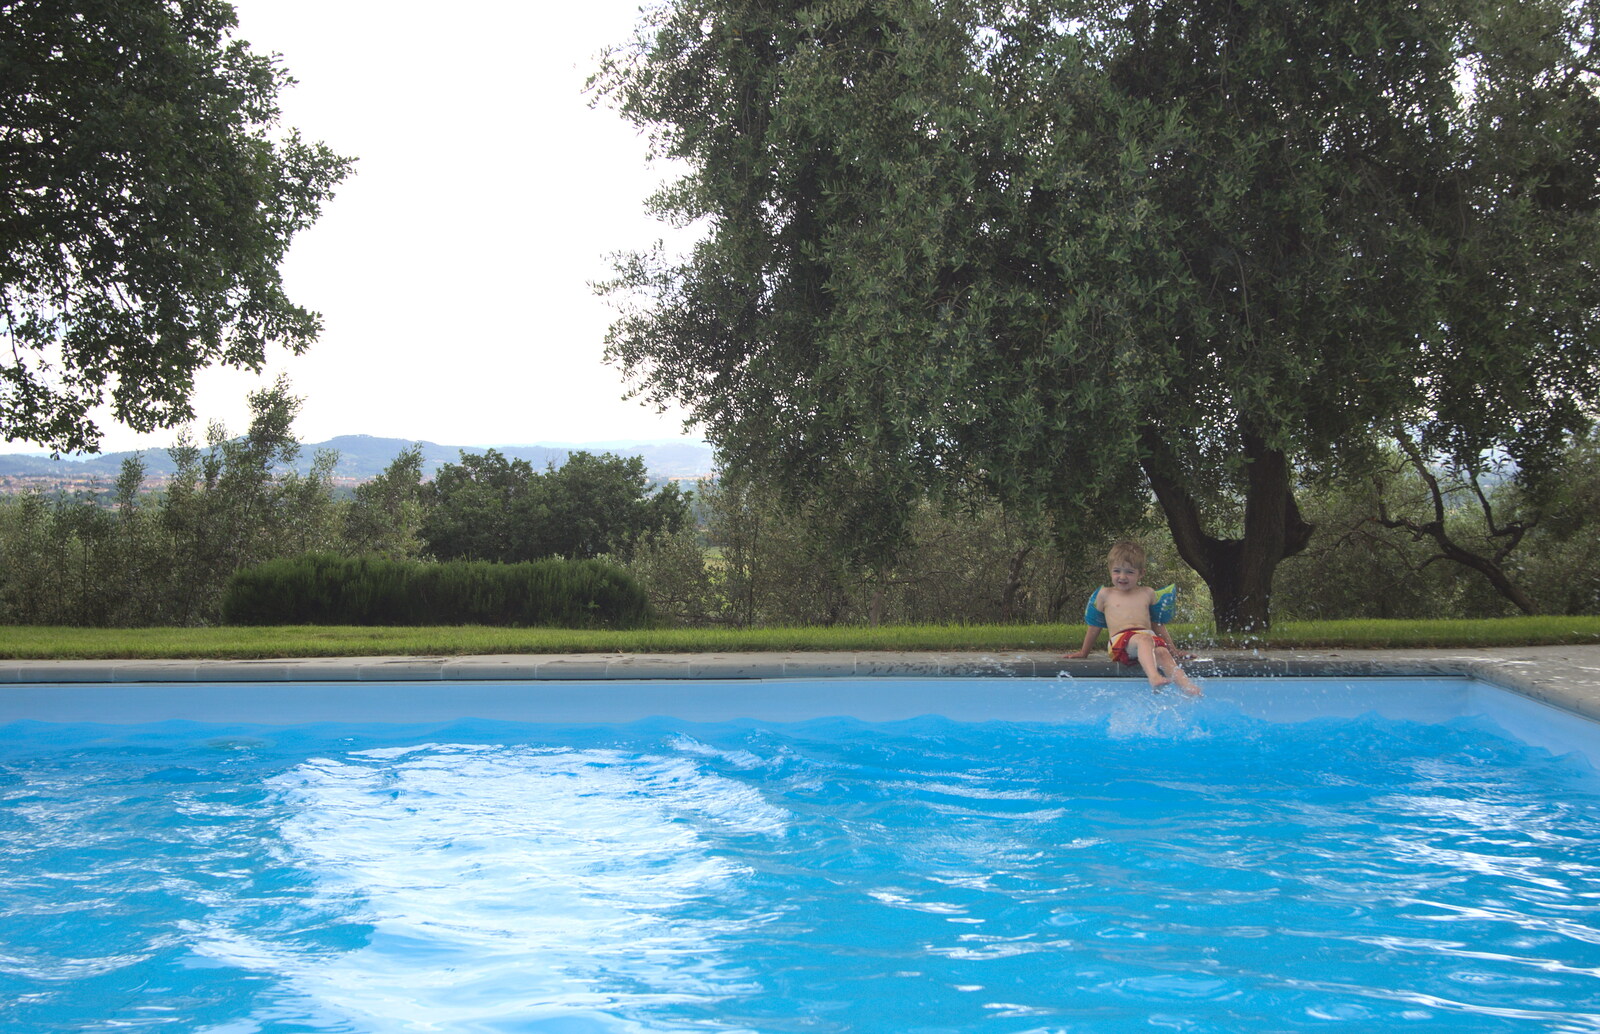 Fred kicks in the water from Italian Weddings, Saracens and Swimming Pools, Arezzo, Tuscany - 12th June 2013